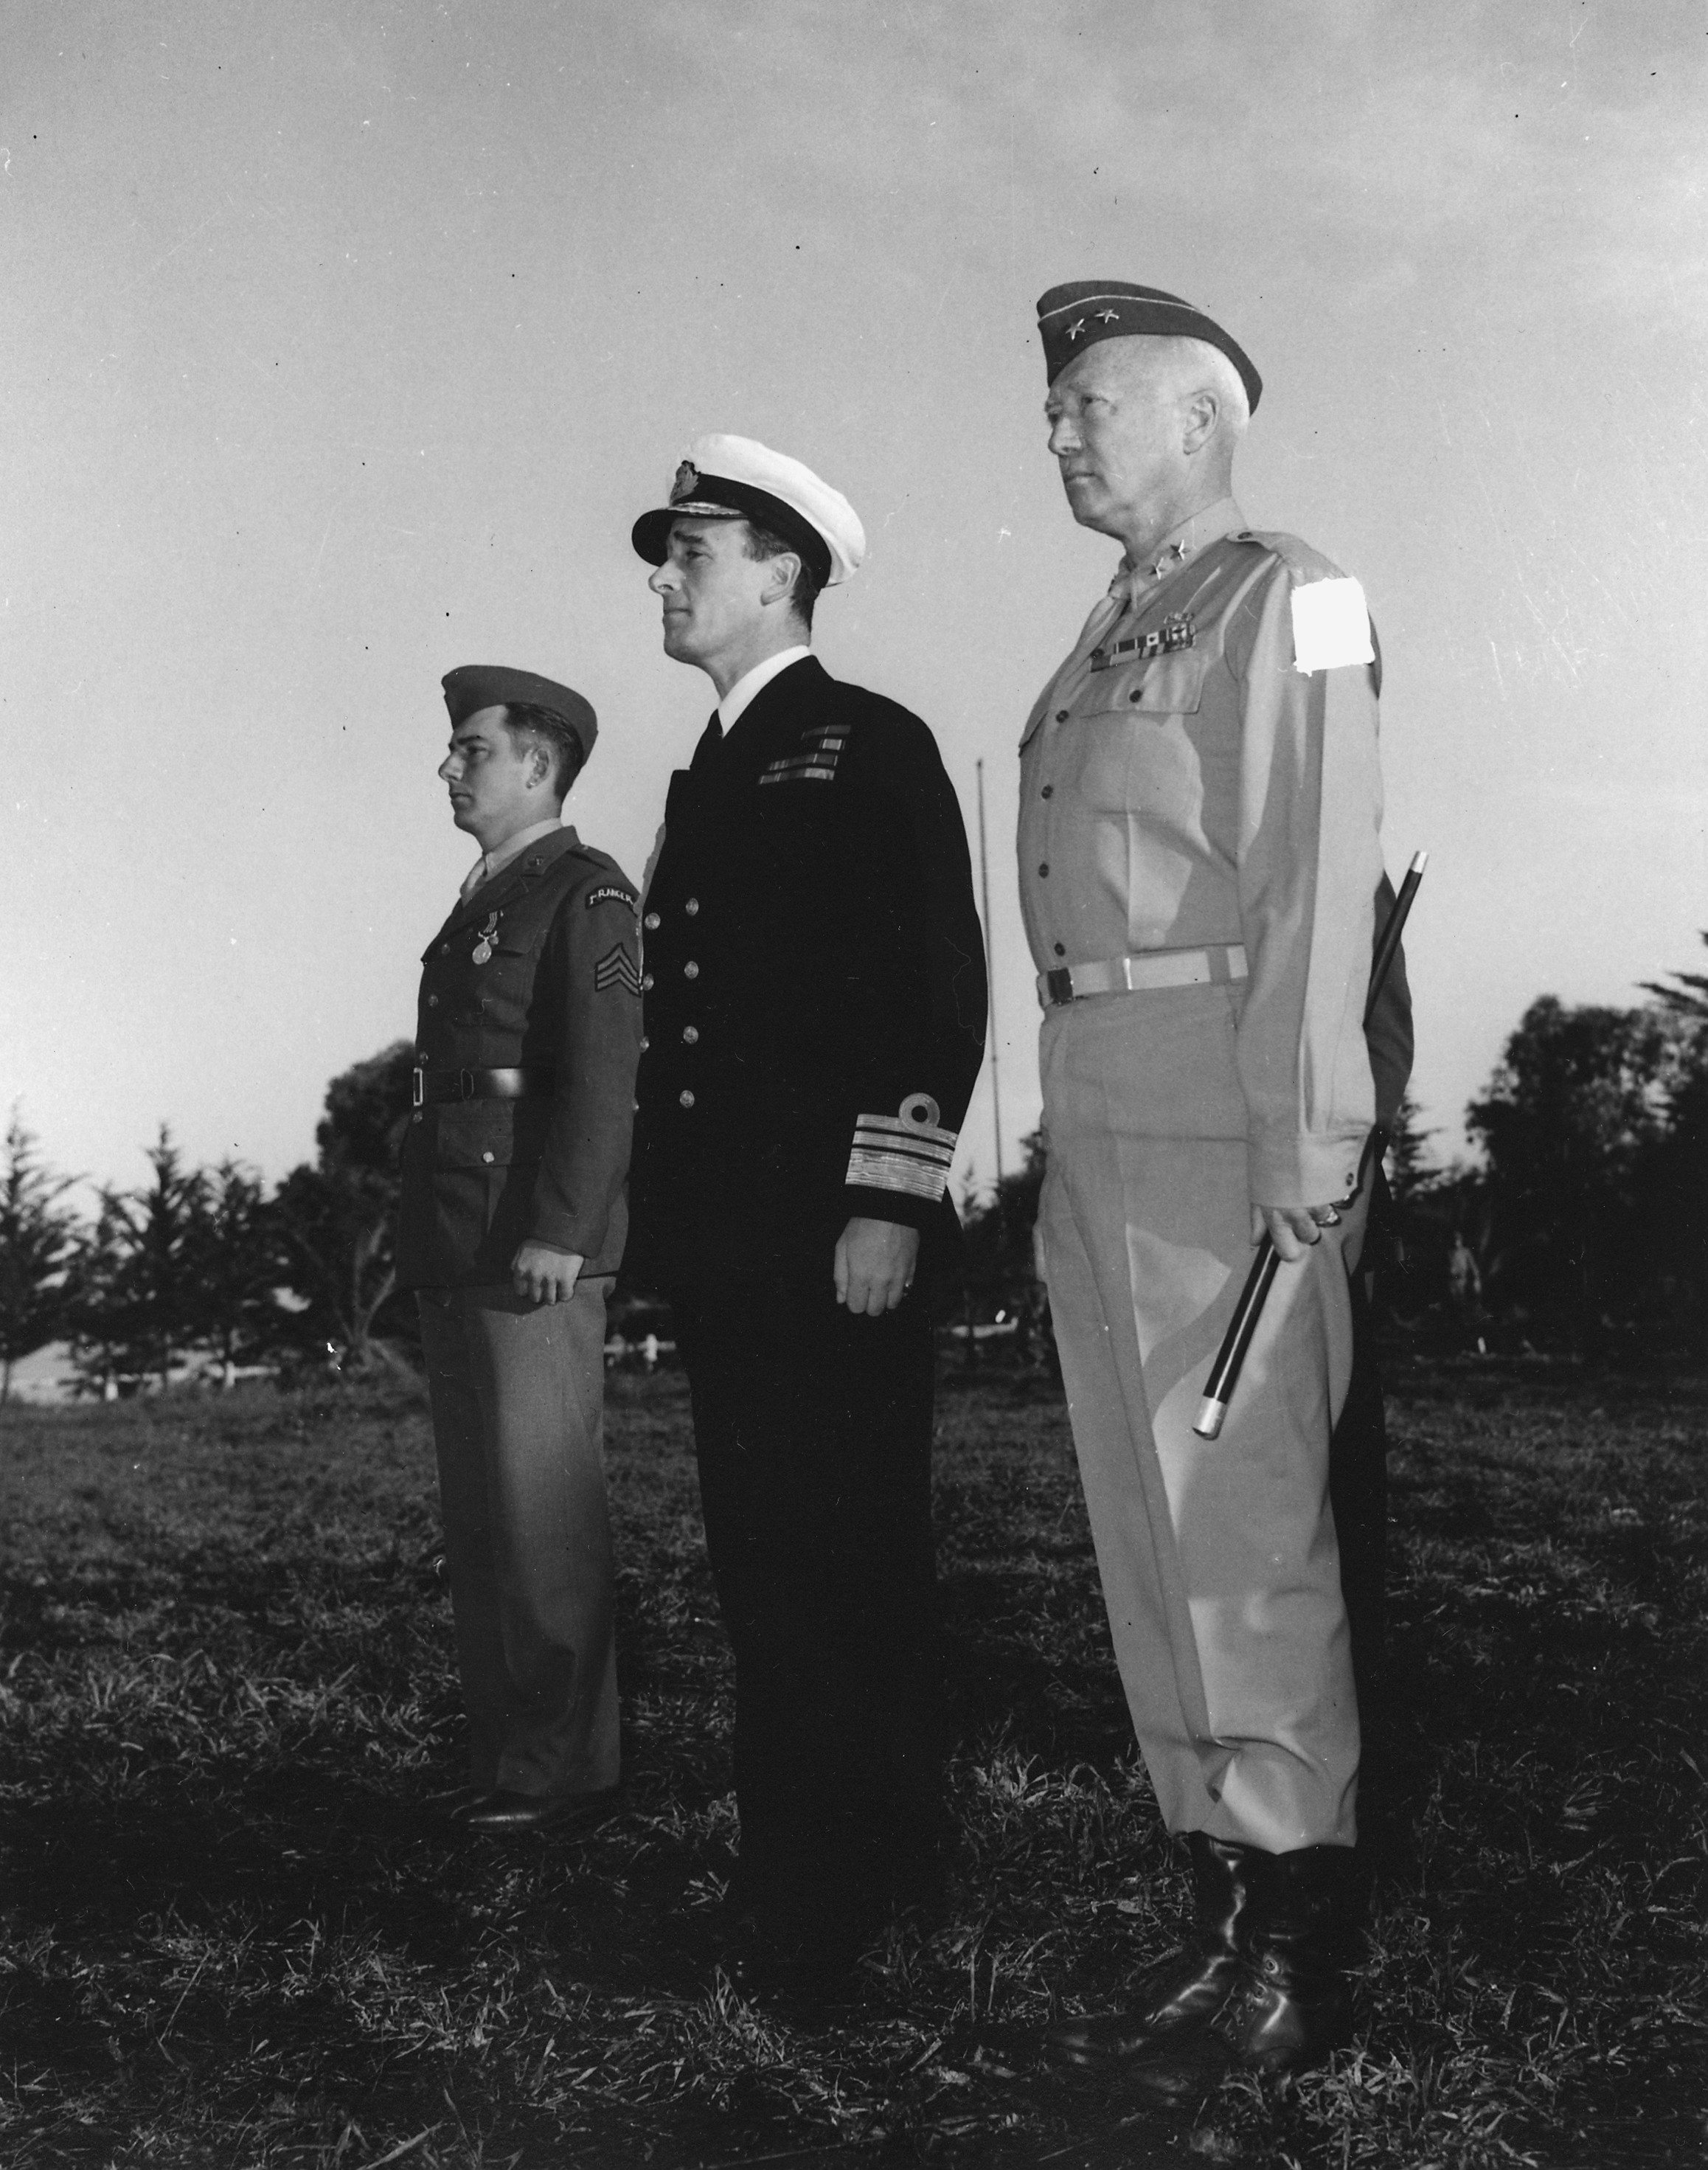 Major General George Patton and Vice-Admiral Louis Mountbatten at Camp Anfa, near Casablanca, Morocco, 18 Jan 1943. Mountbatten had just presented Britain’s Military Medal to US Army Ranger Sergeant Franklin Koons.